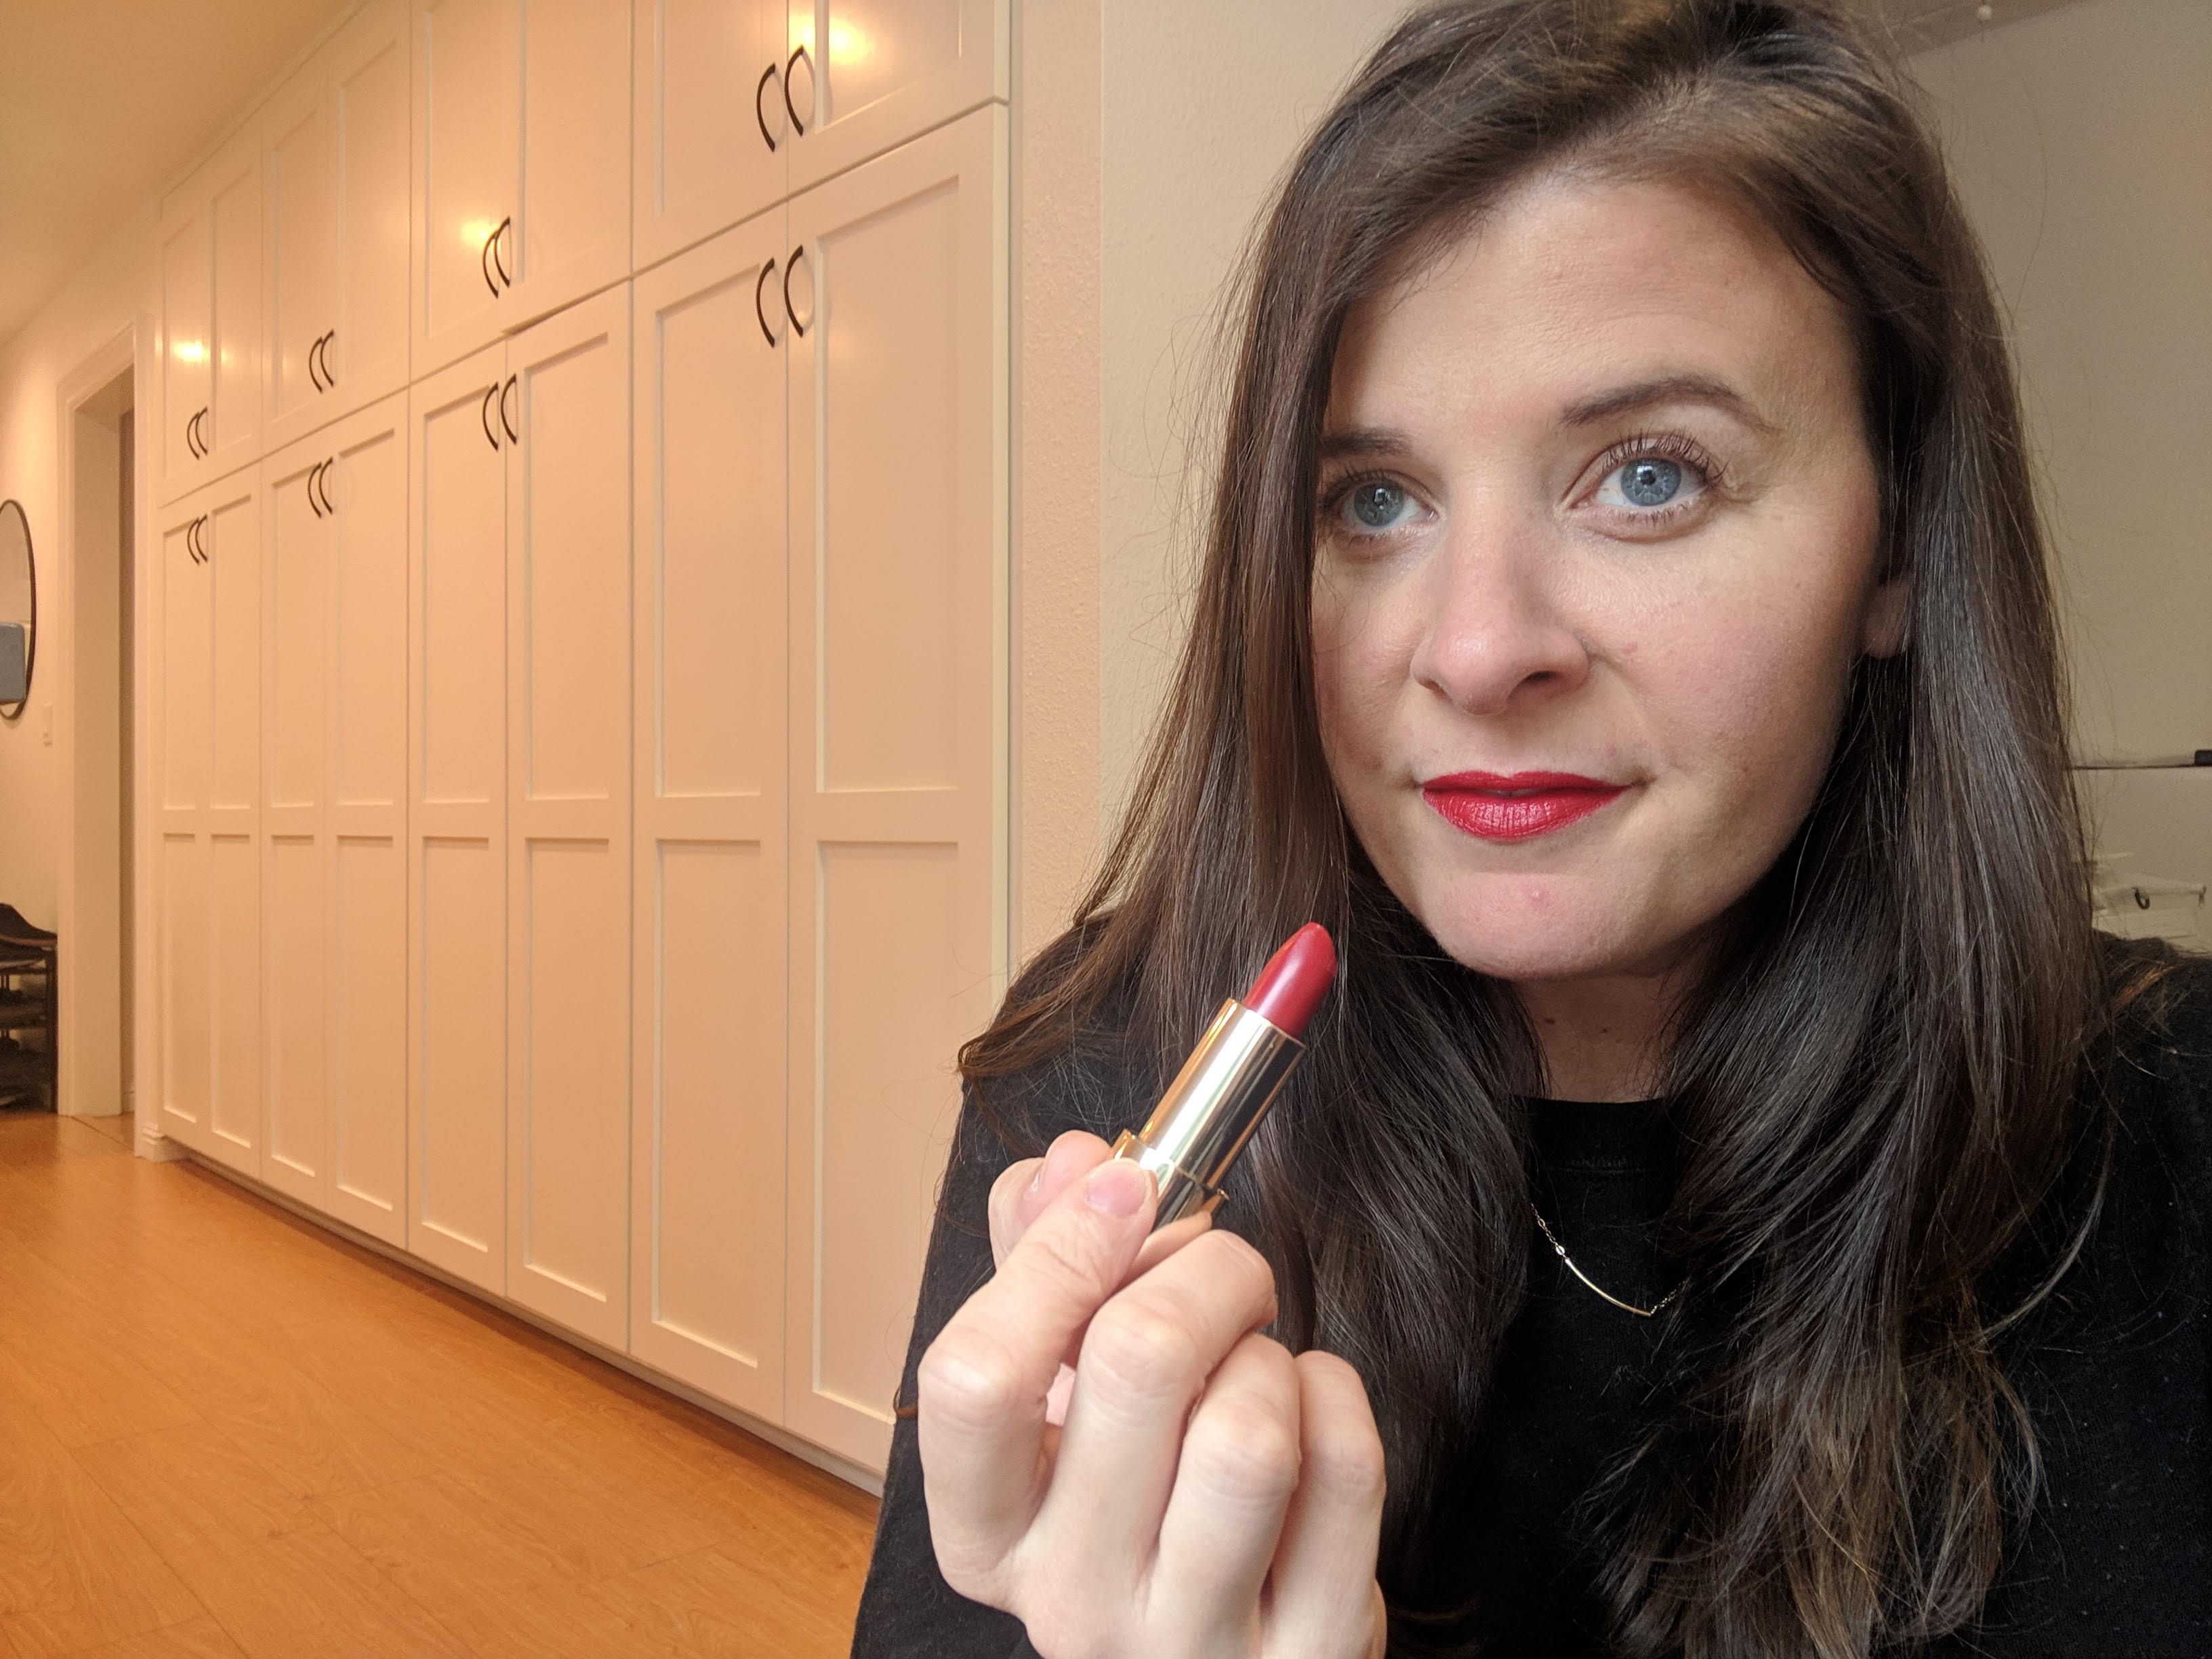 BECCA Cosmetics Ultimate Lipstick Love (Cool Red) in Cherry, a cool vibrant...